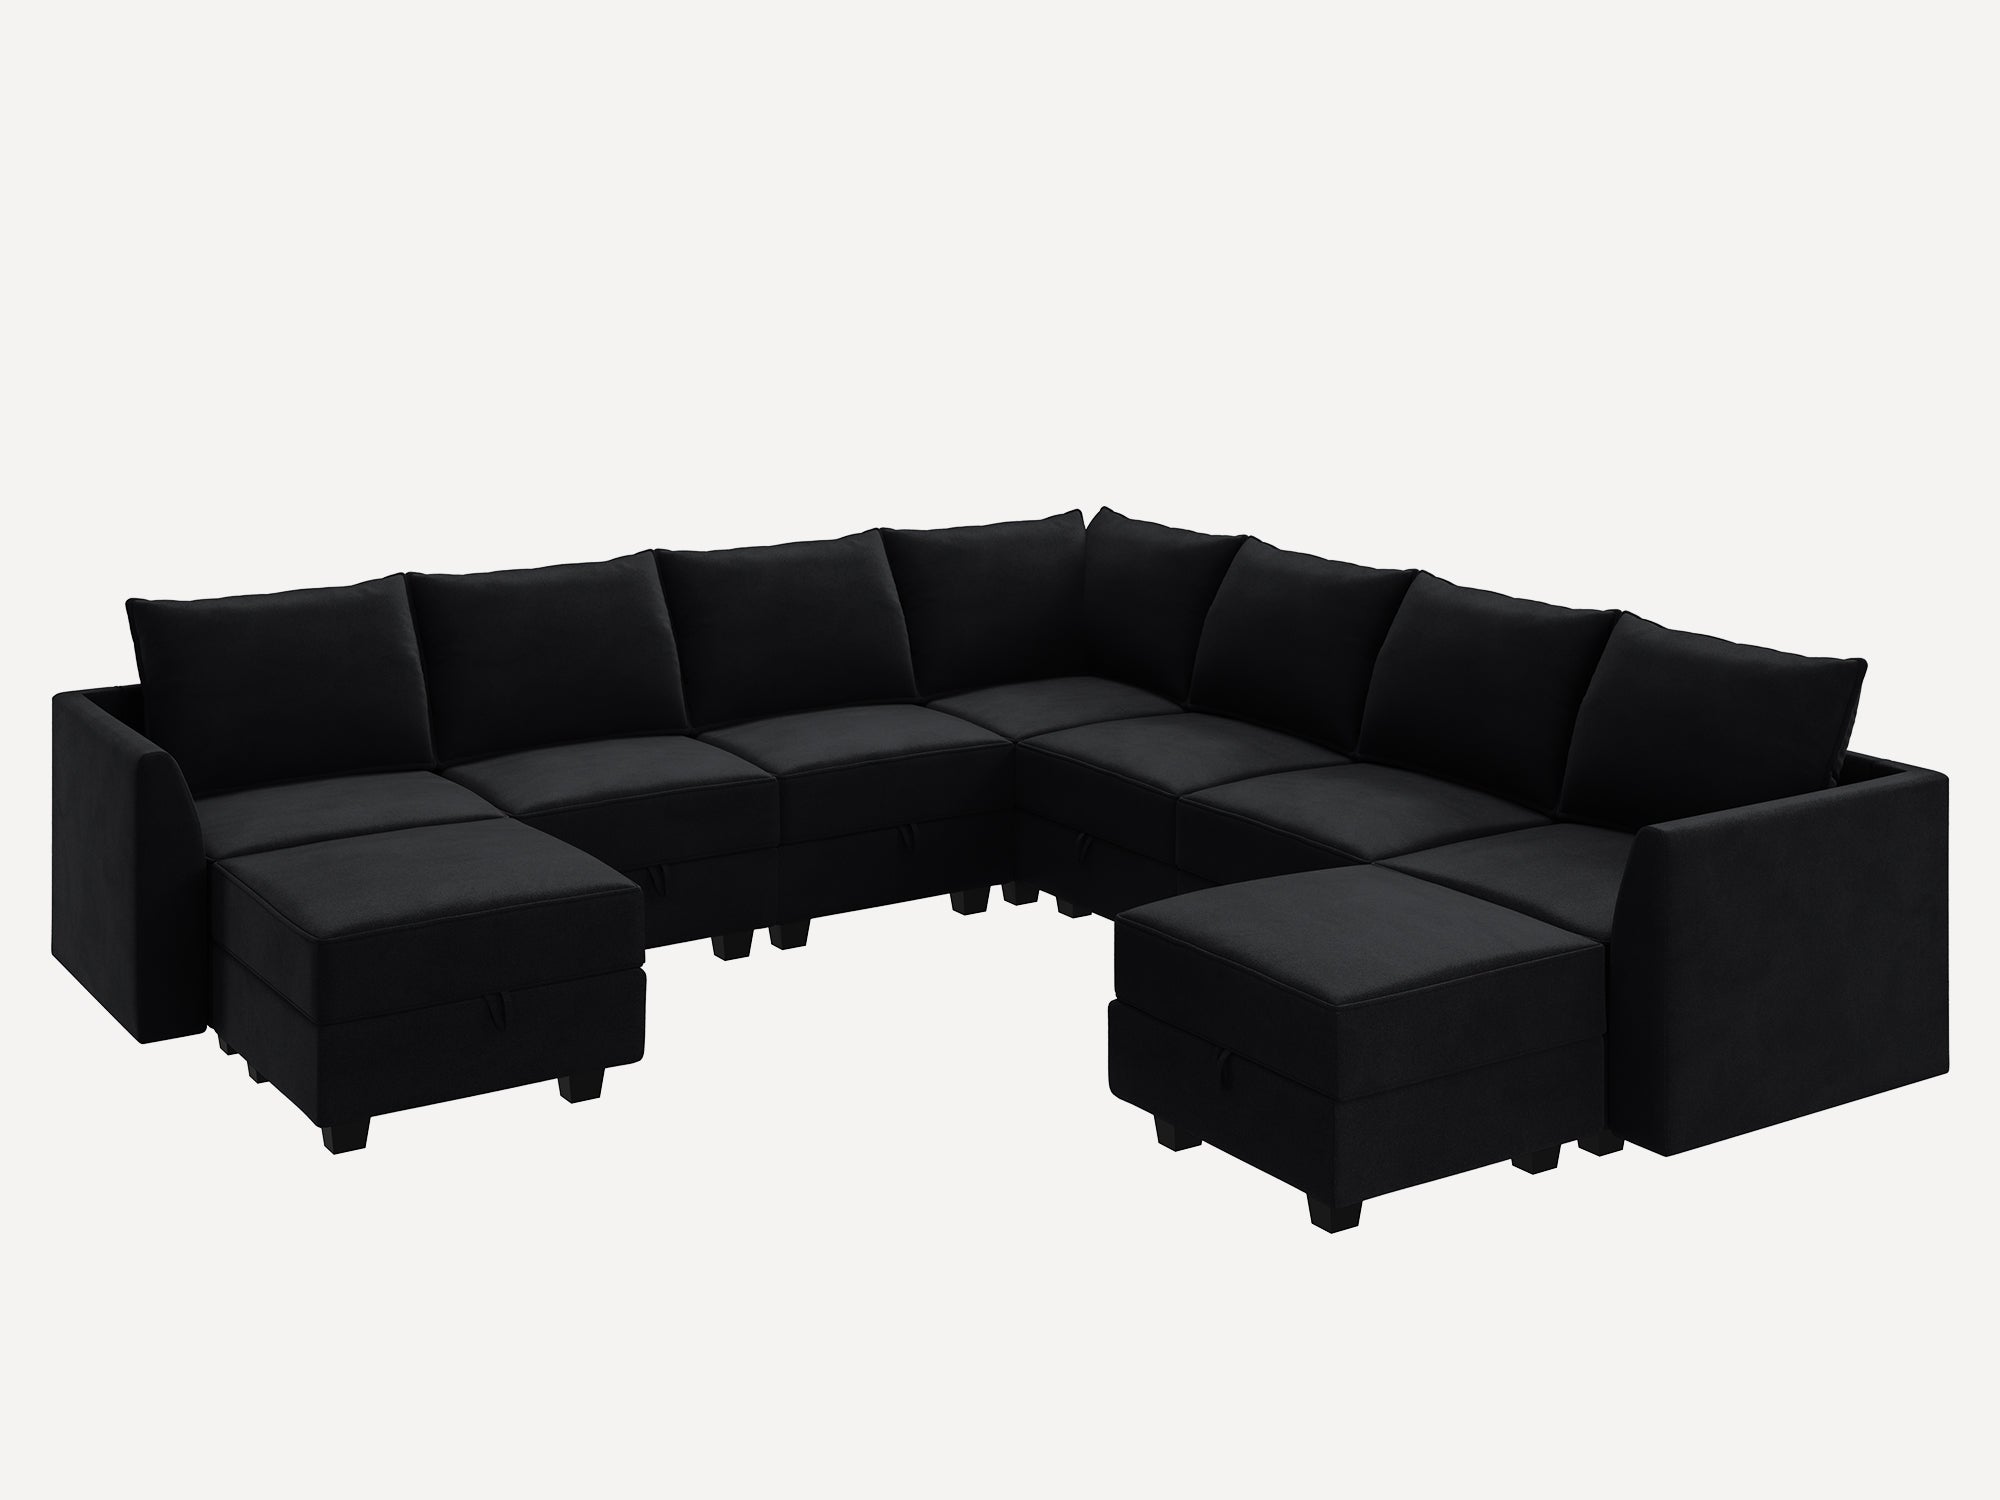 HONBAY Velvet 7-Seat Modular Sofa Corner Sectional Couch With Storage Seat #Color_Black